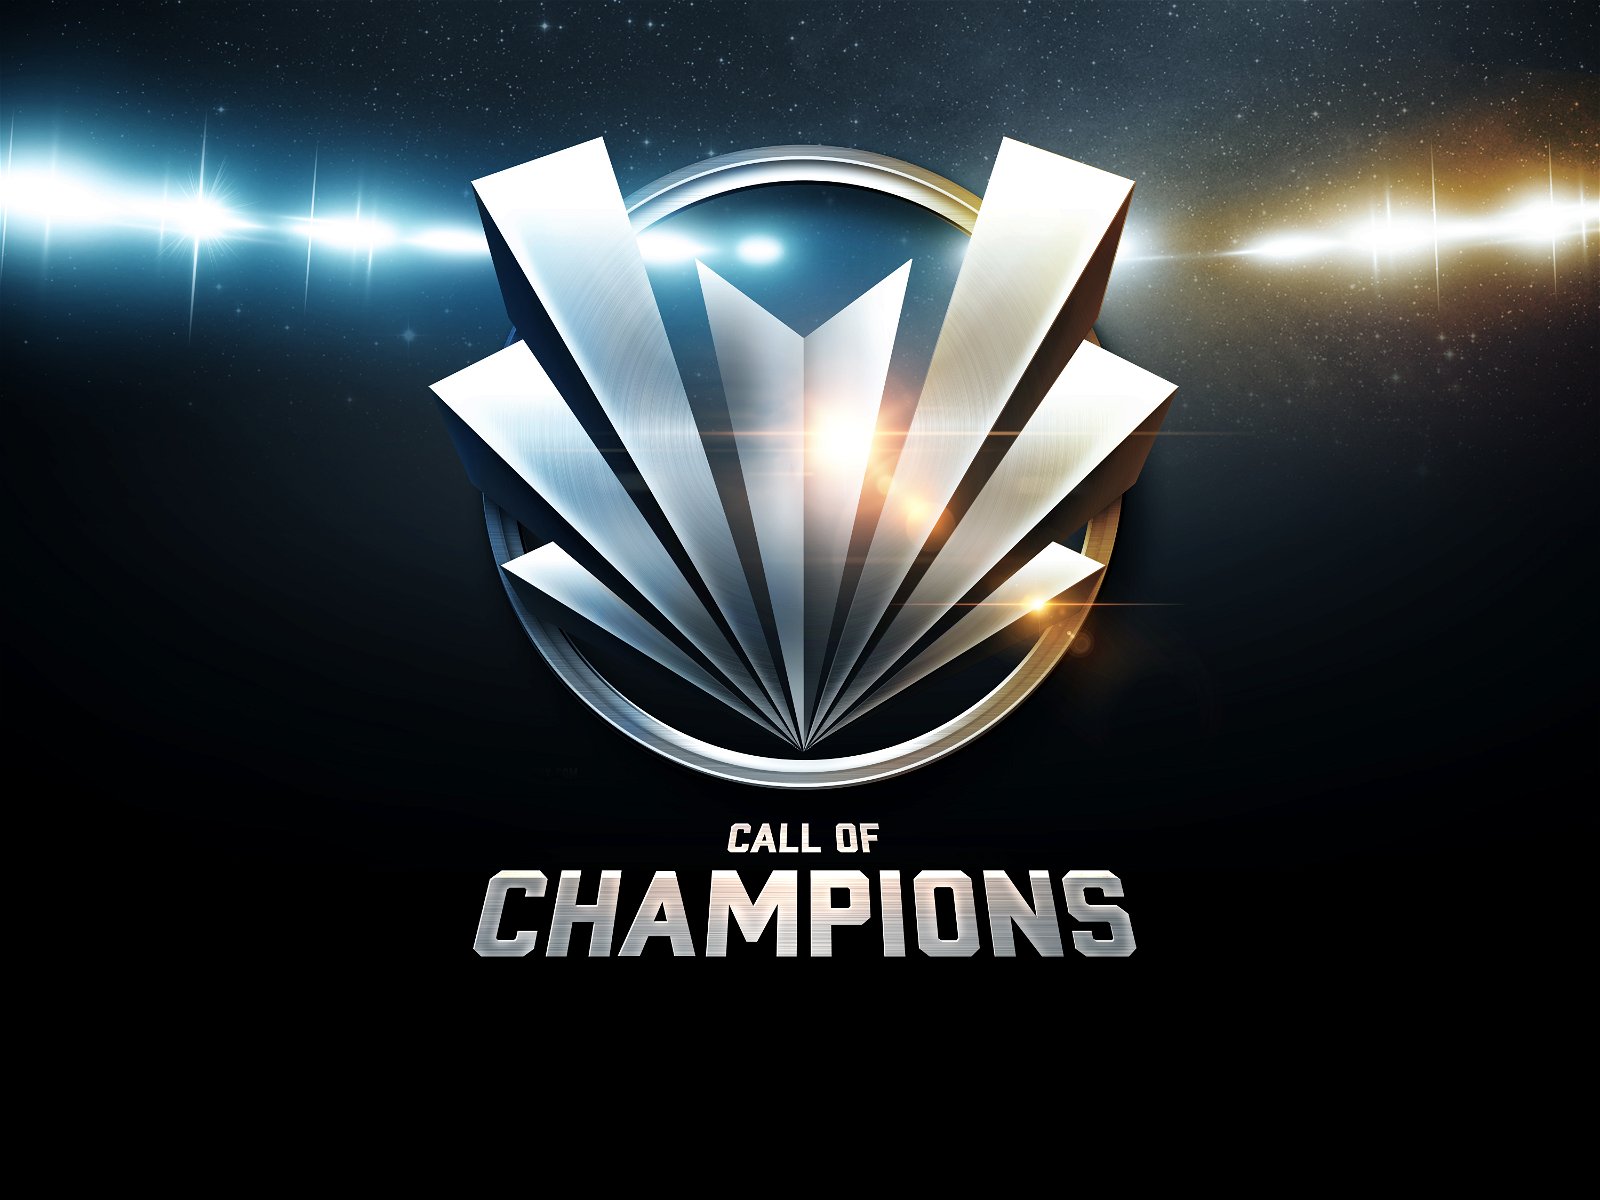 Image of Call of Champions